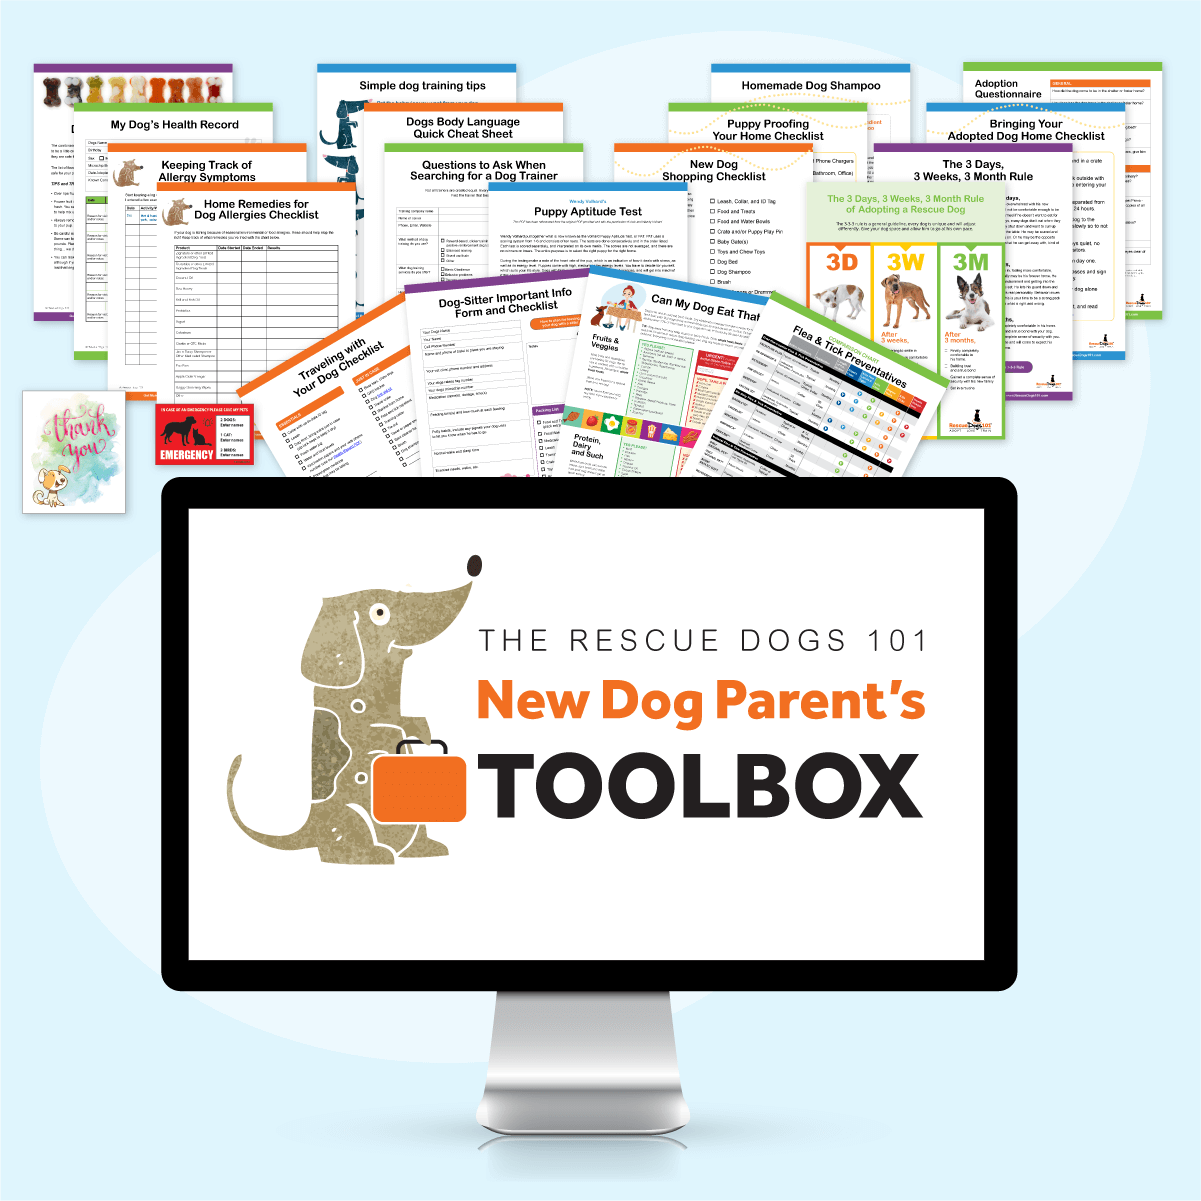 New dog parent's toolbox pages